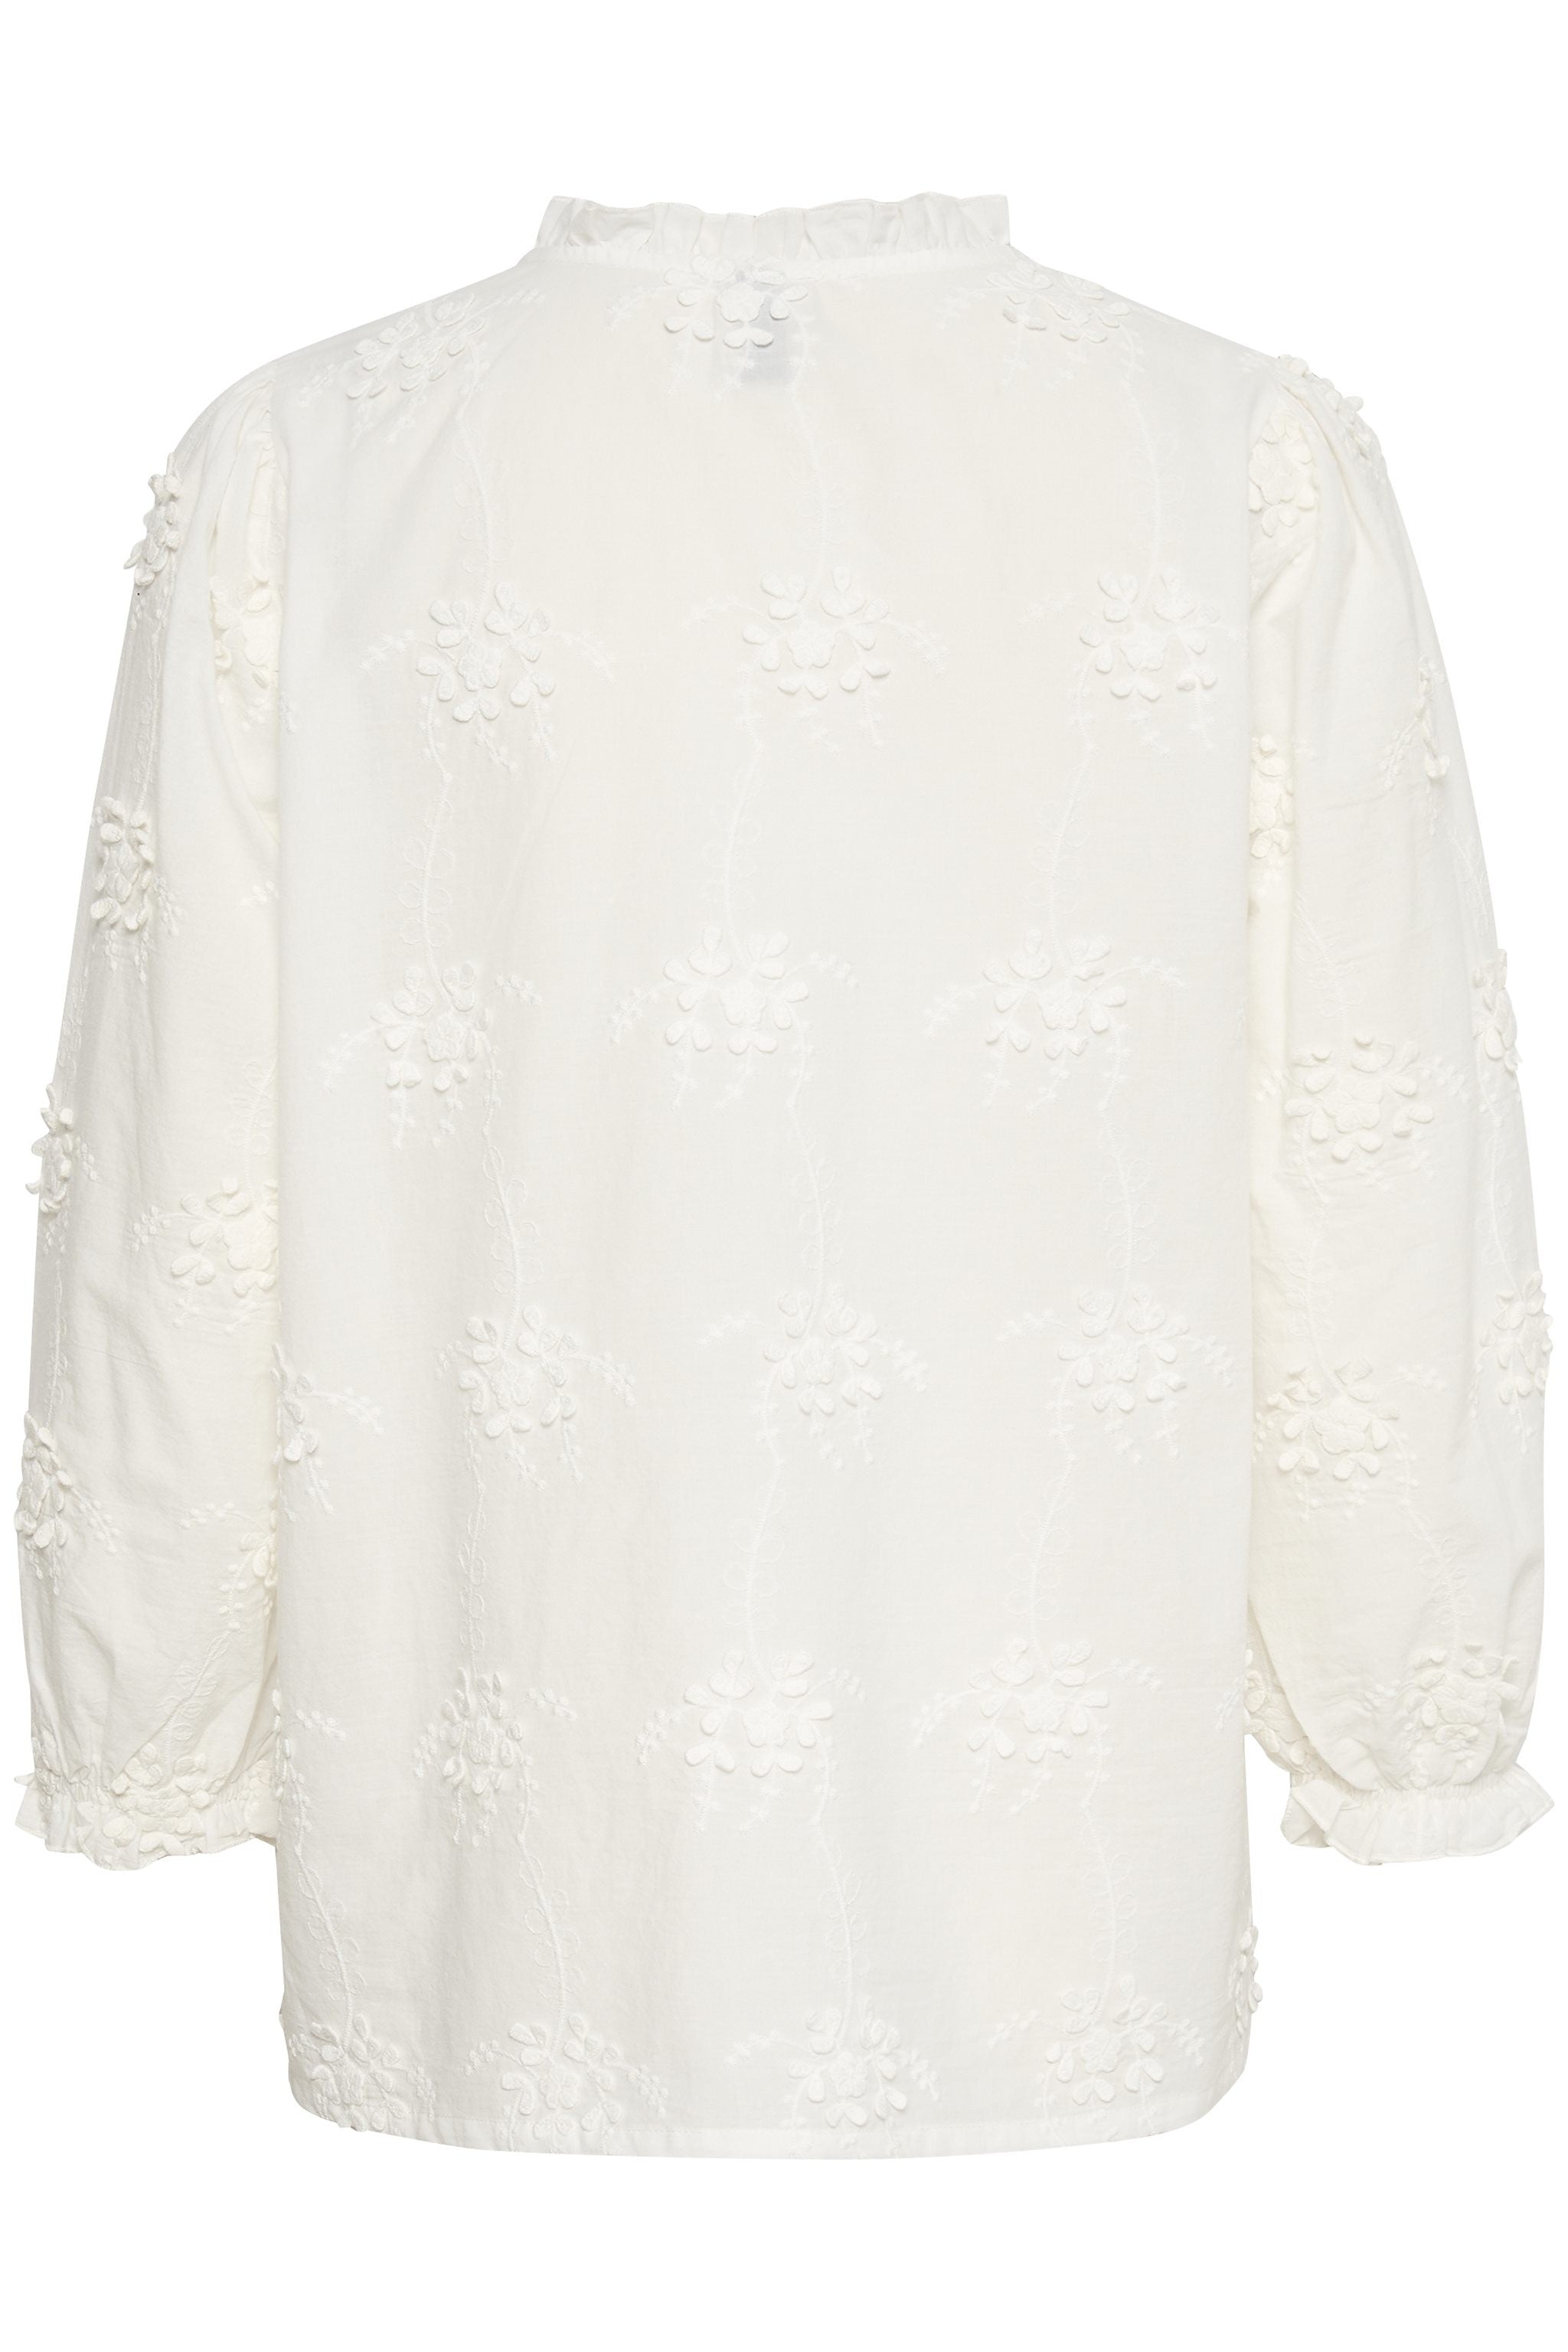 Culture Embroidered Blouse  White